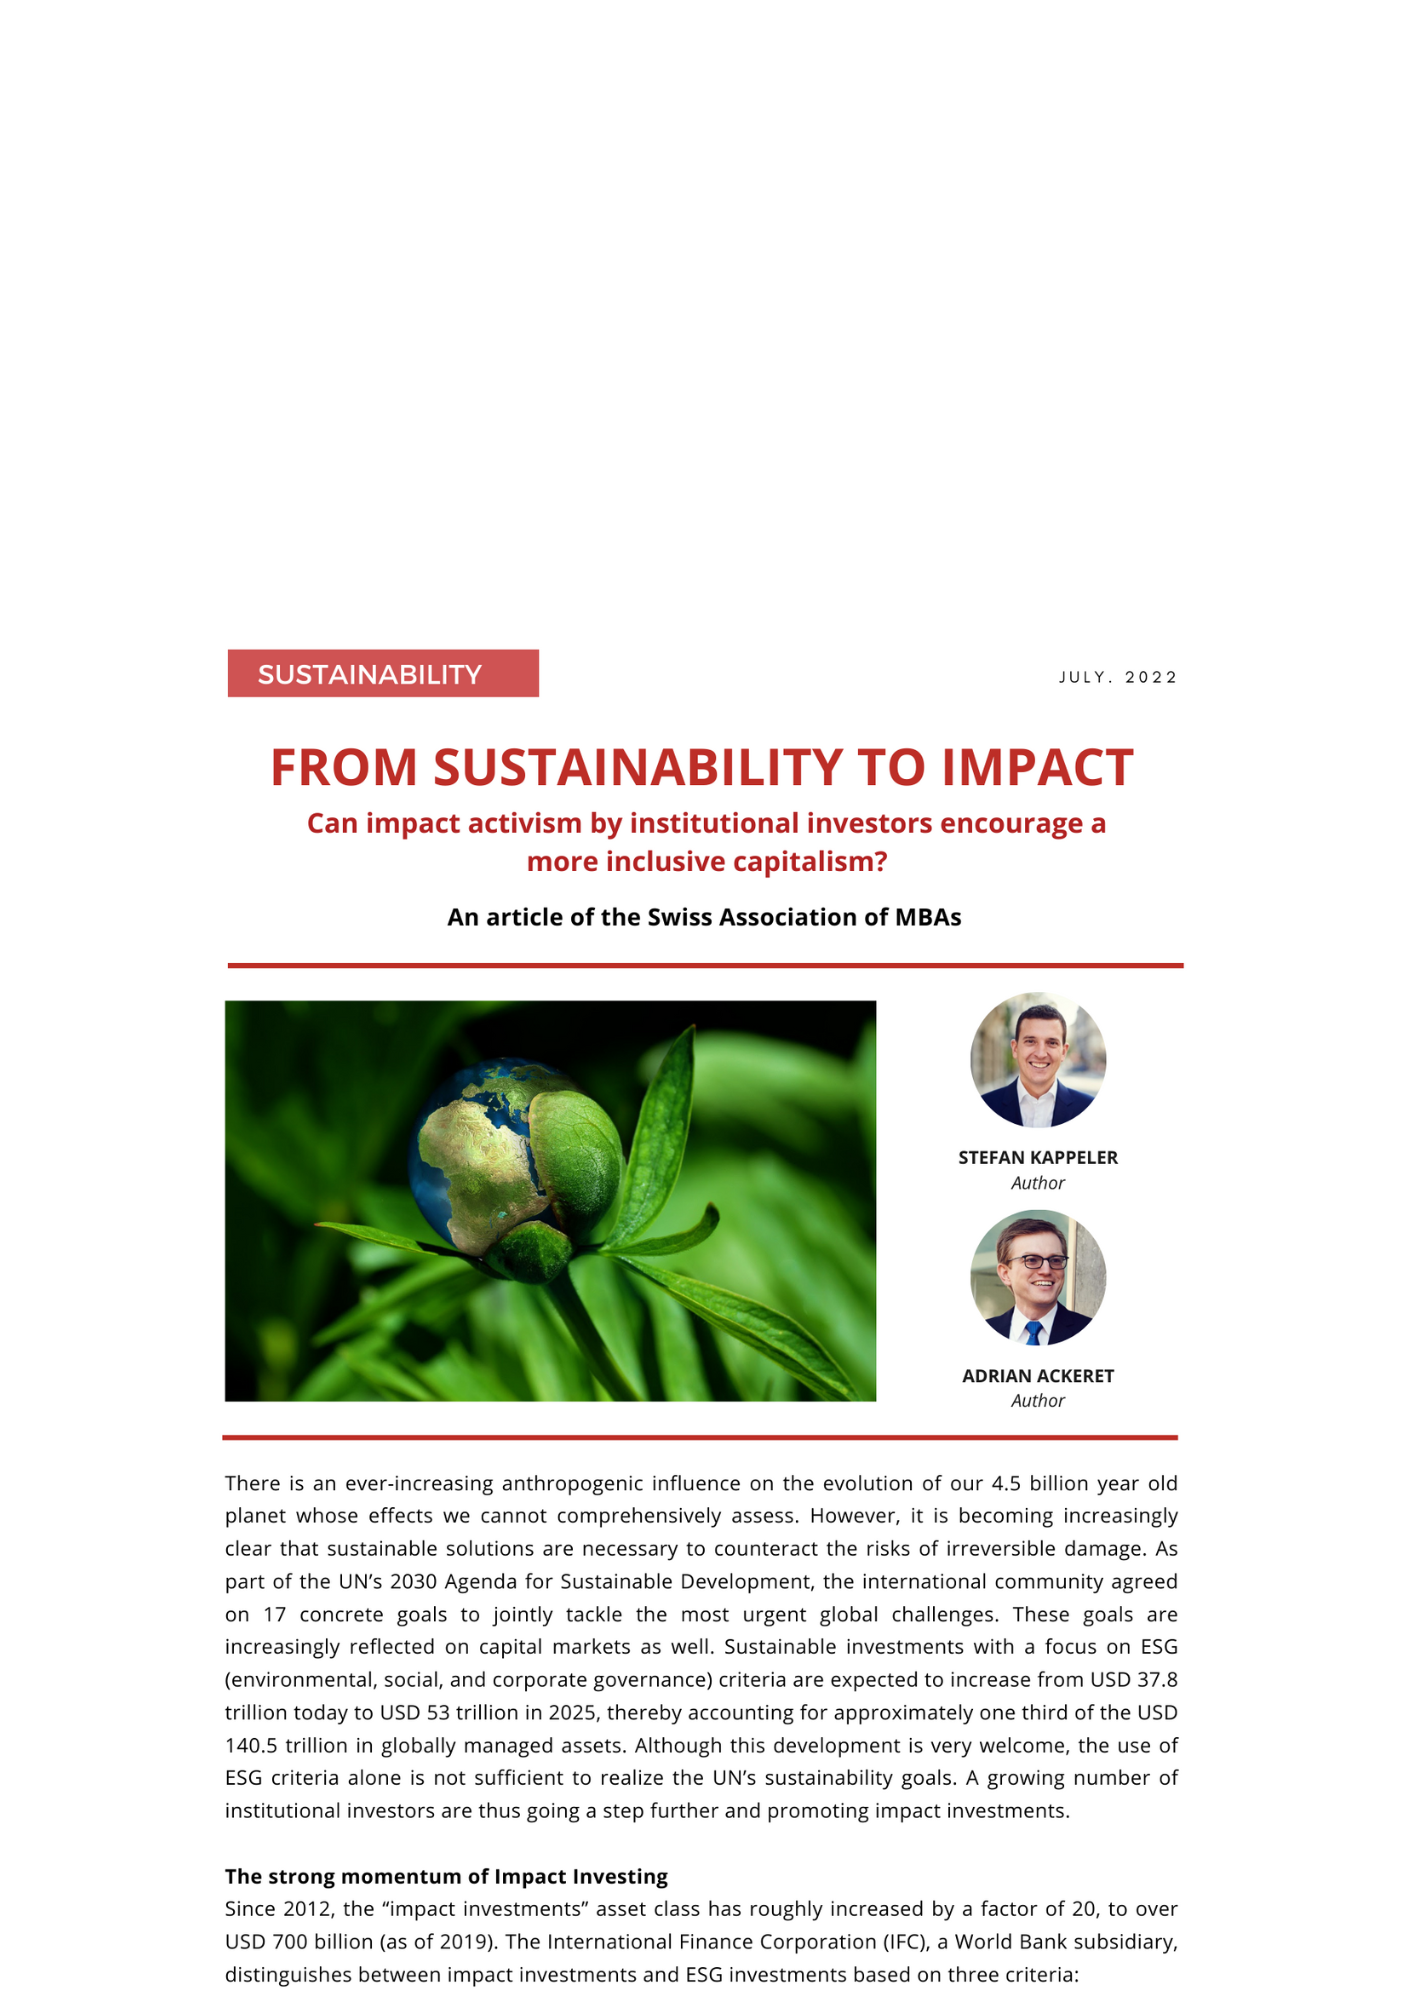 FROM SUSTAINABILITY TO IMPACT - Can impact activism by institutional investors encourage a more inclusive capitalism?